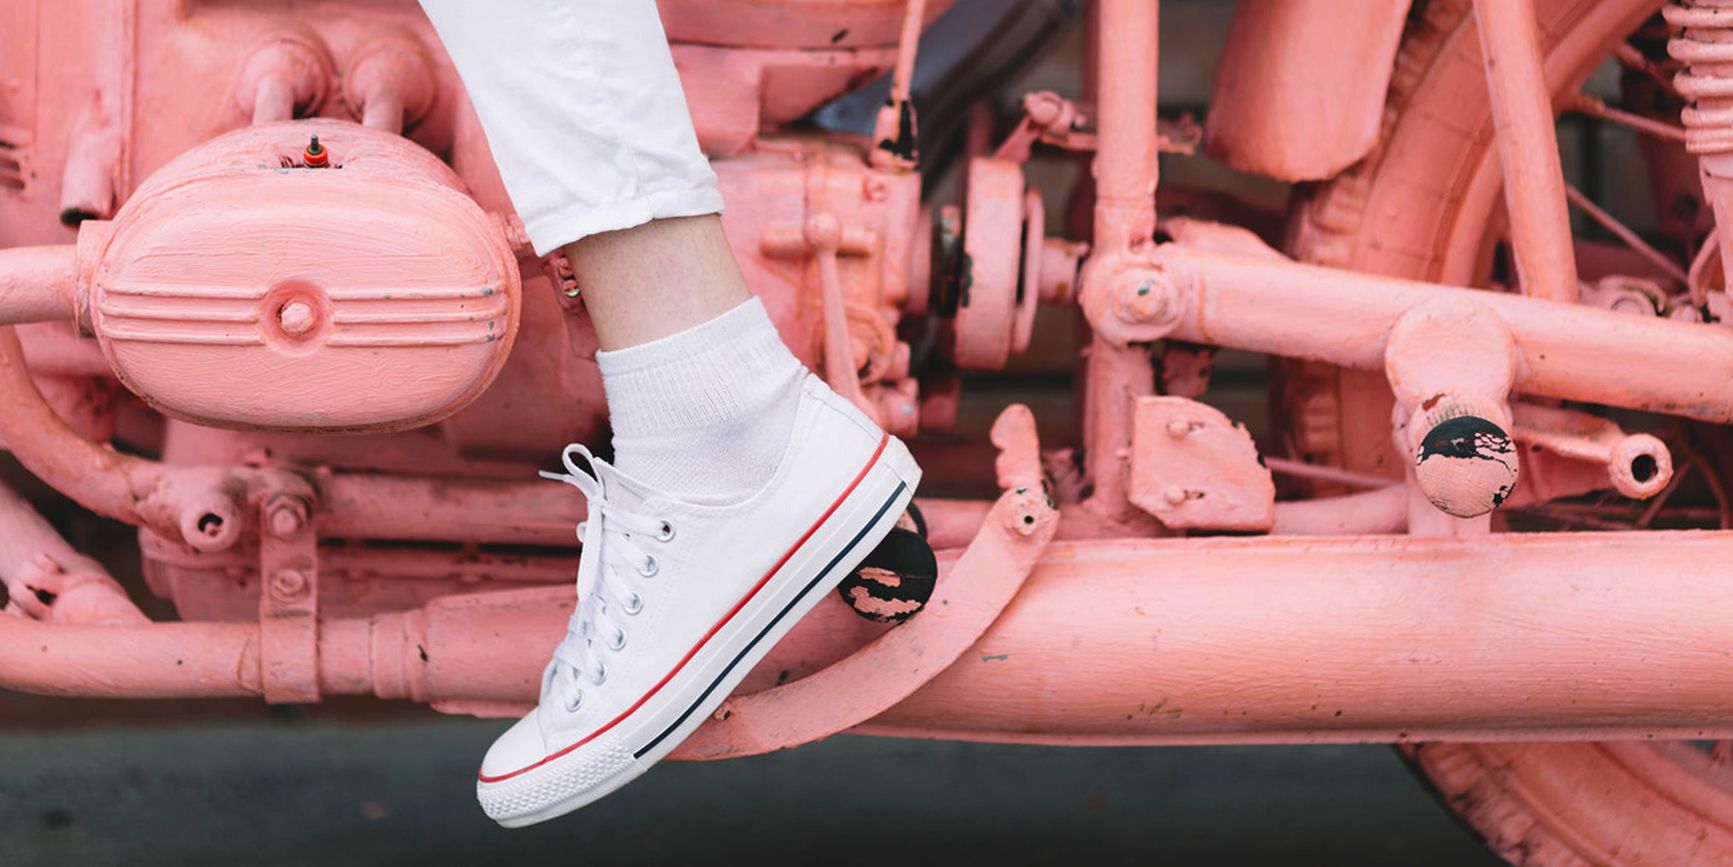 best affordable white sneakers